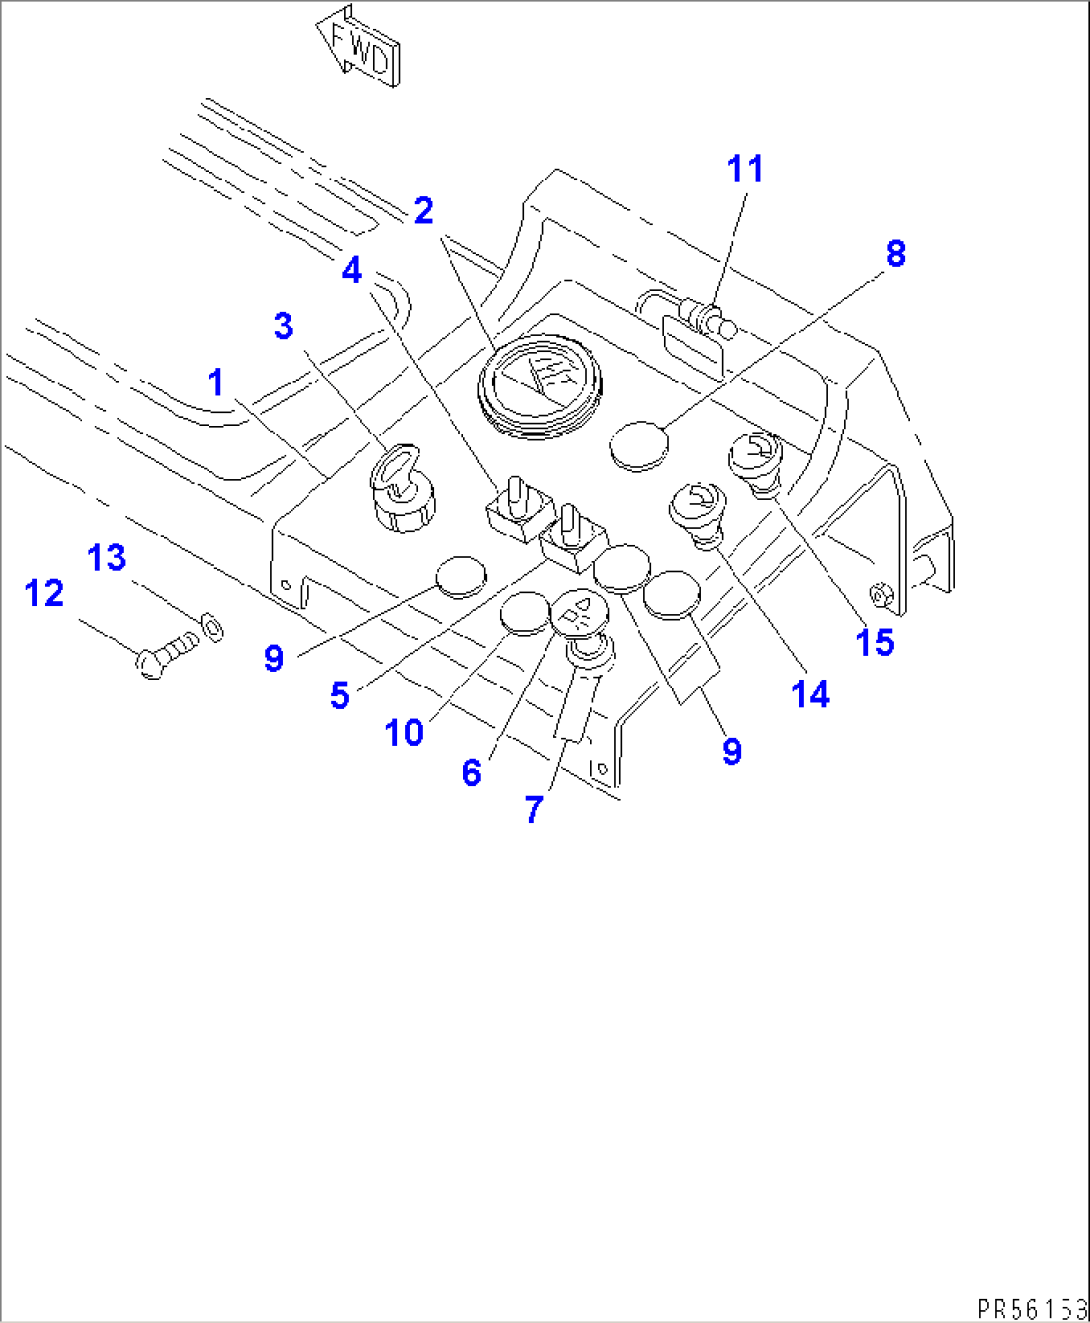 INSTRUMENT PANEL (WITH WIPER)(#1574-)